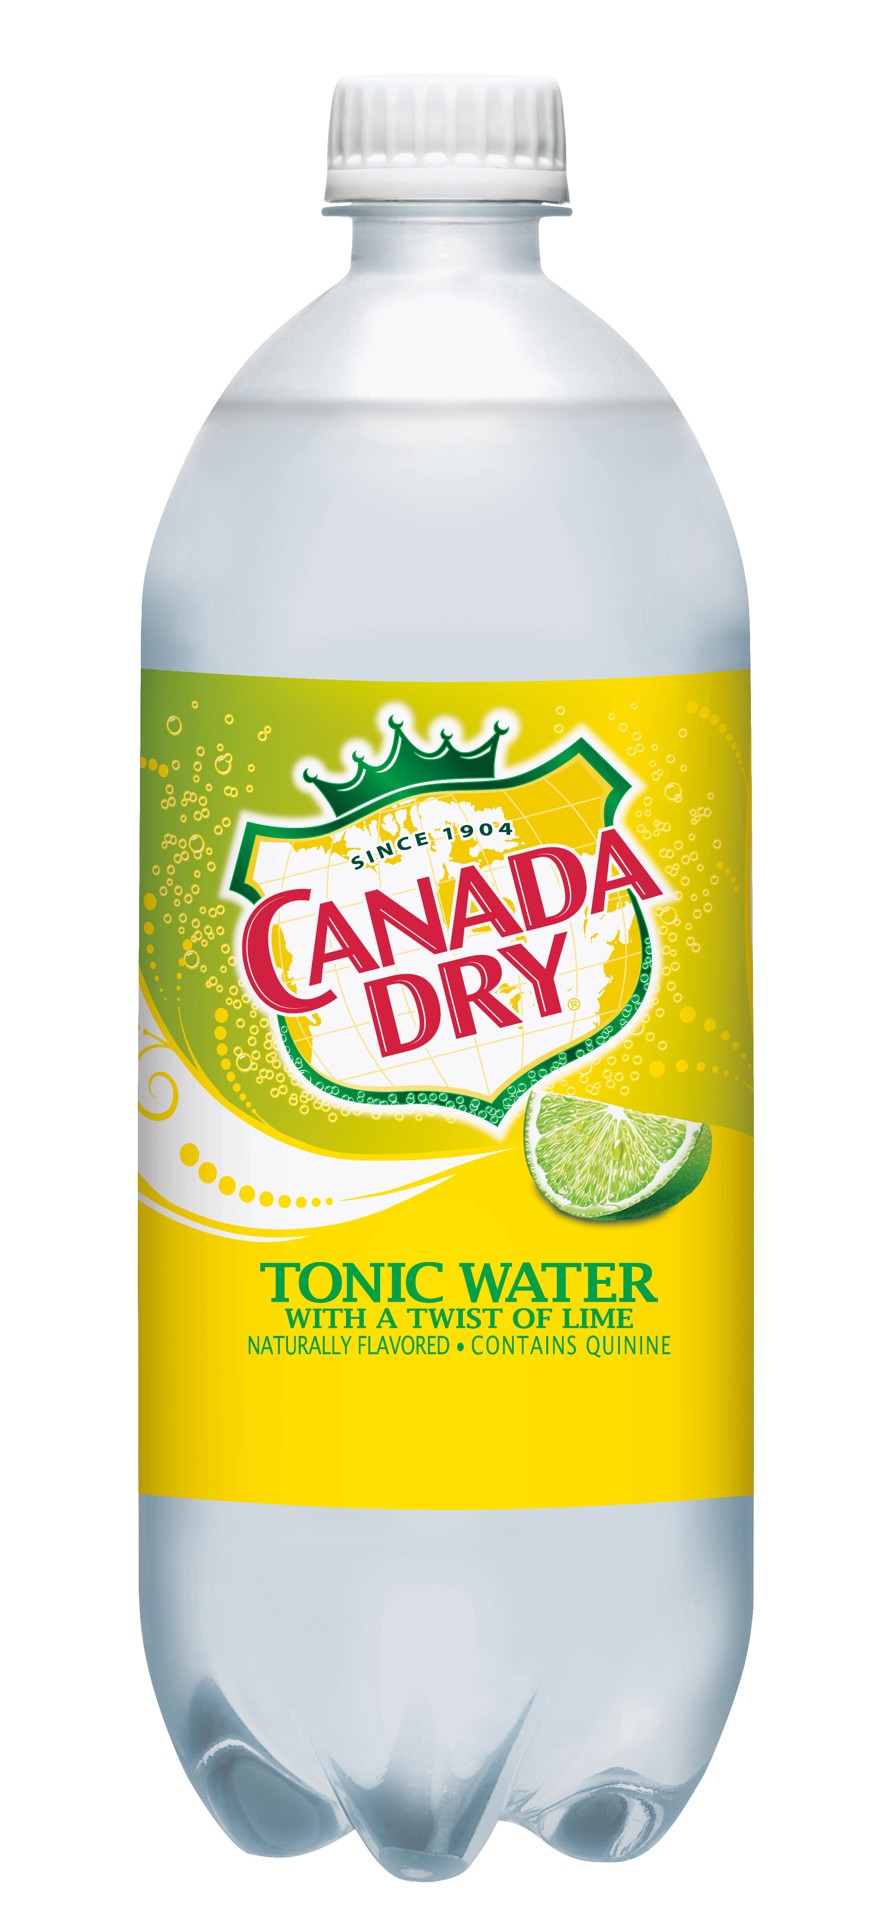 slide 1 of 2, Canada Dry Tonic Water with a Twist of Lime bottle, 1 liter